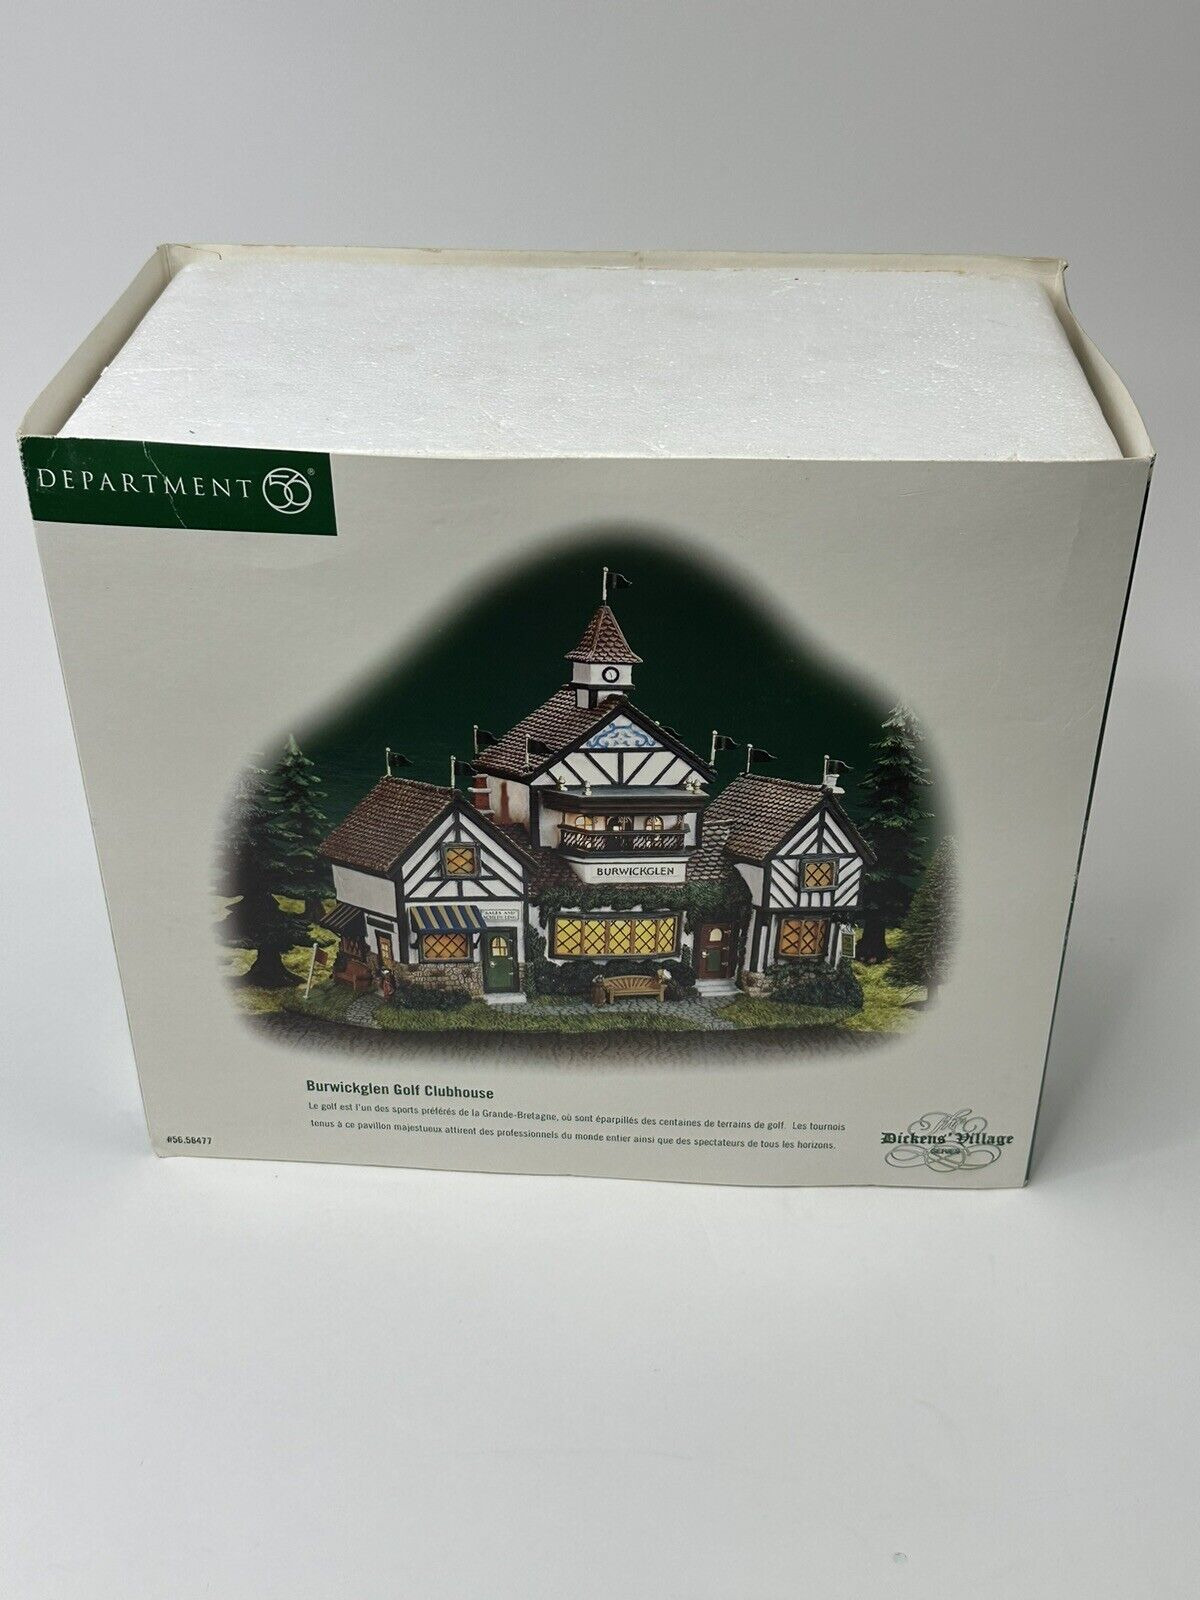 Dept 56 Burwickglen Golf  Dickins Clubhouse 56.58477 Complete Fathers Day